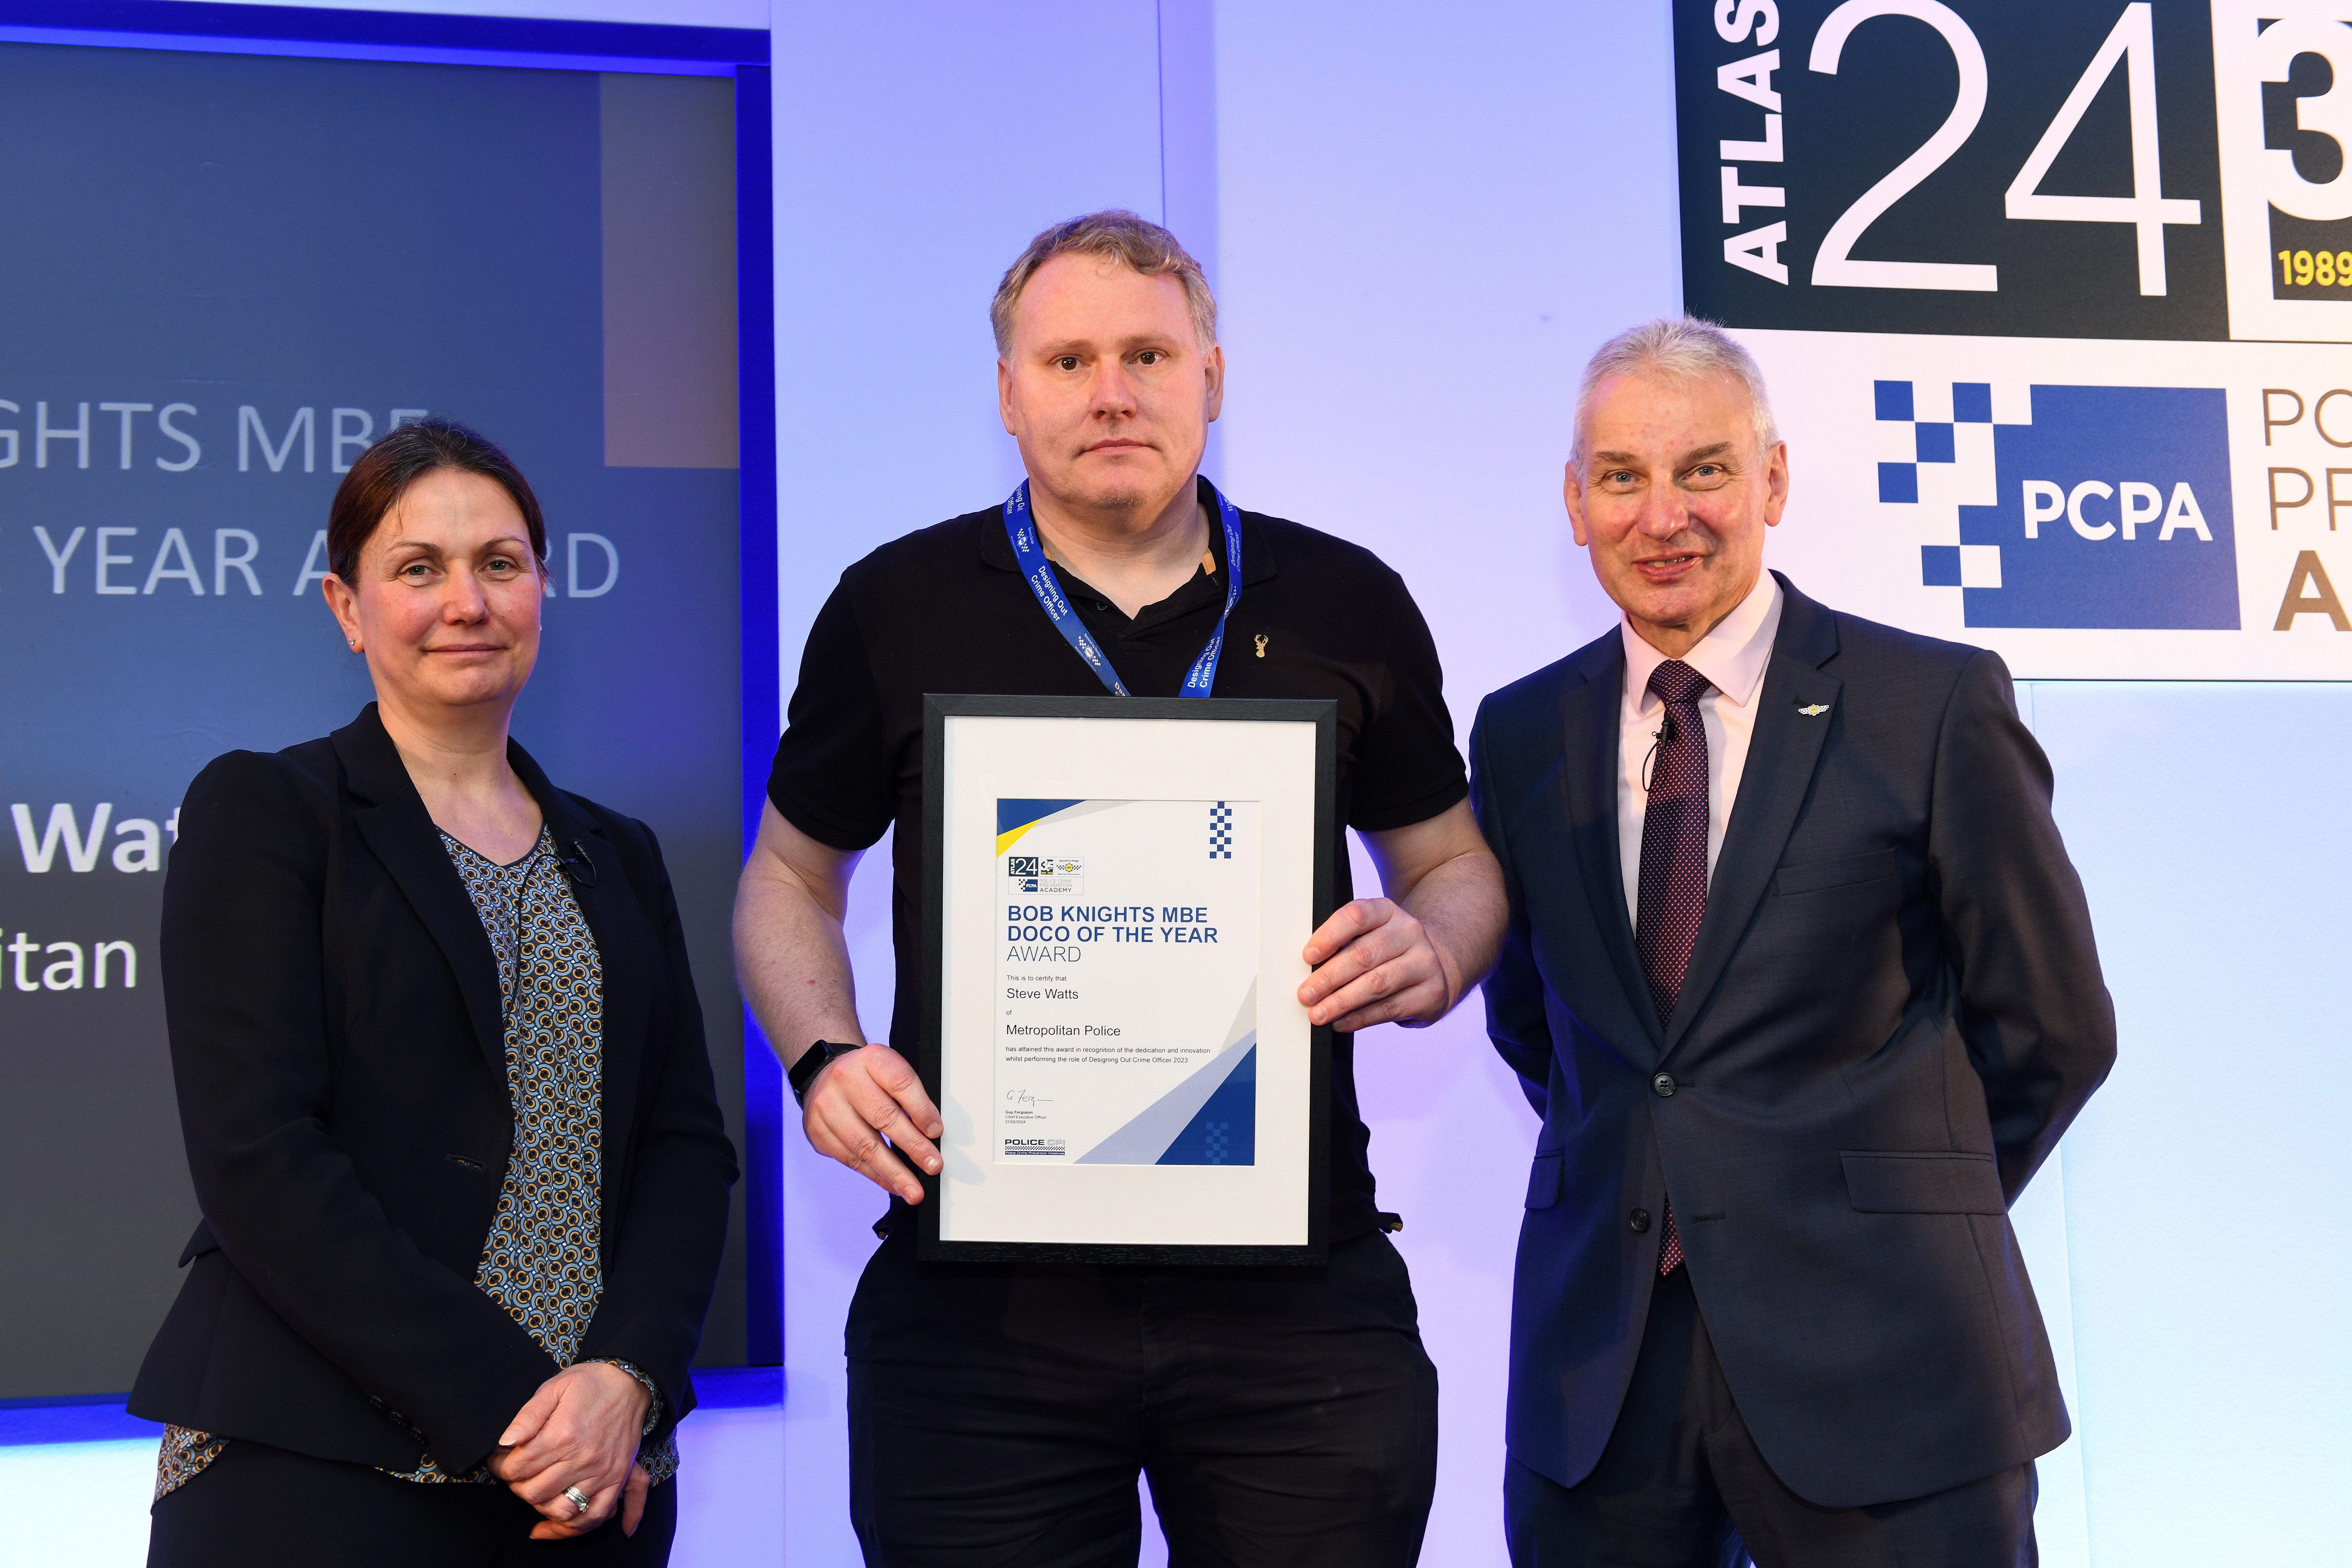 Met Designing Out Crime Officer receives award for contributions to crime prevention